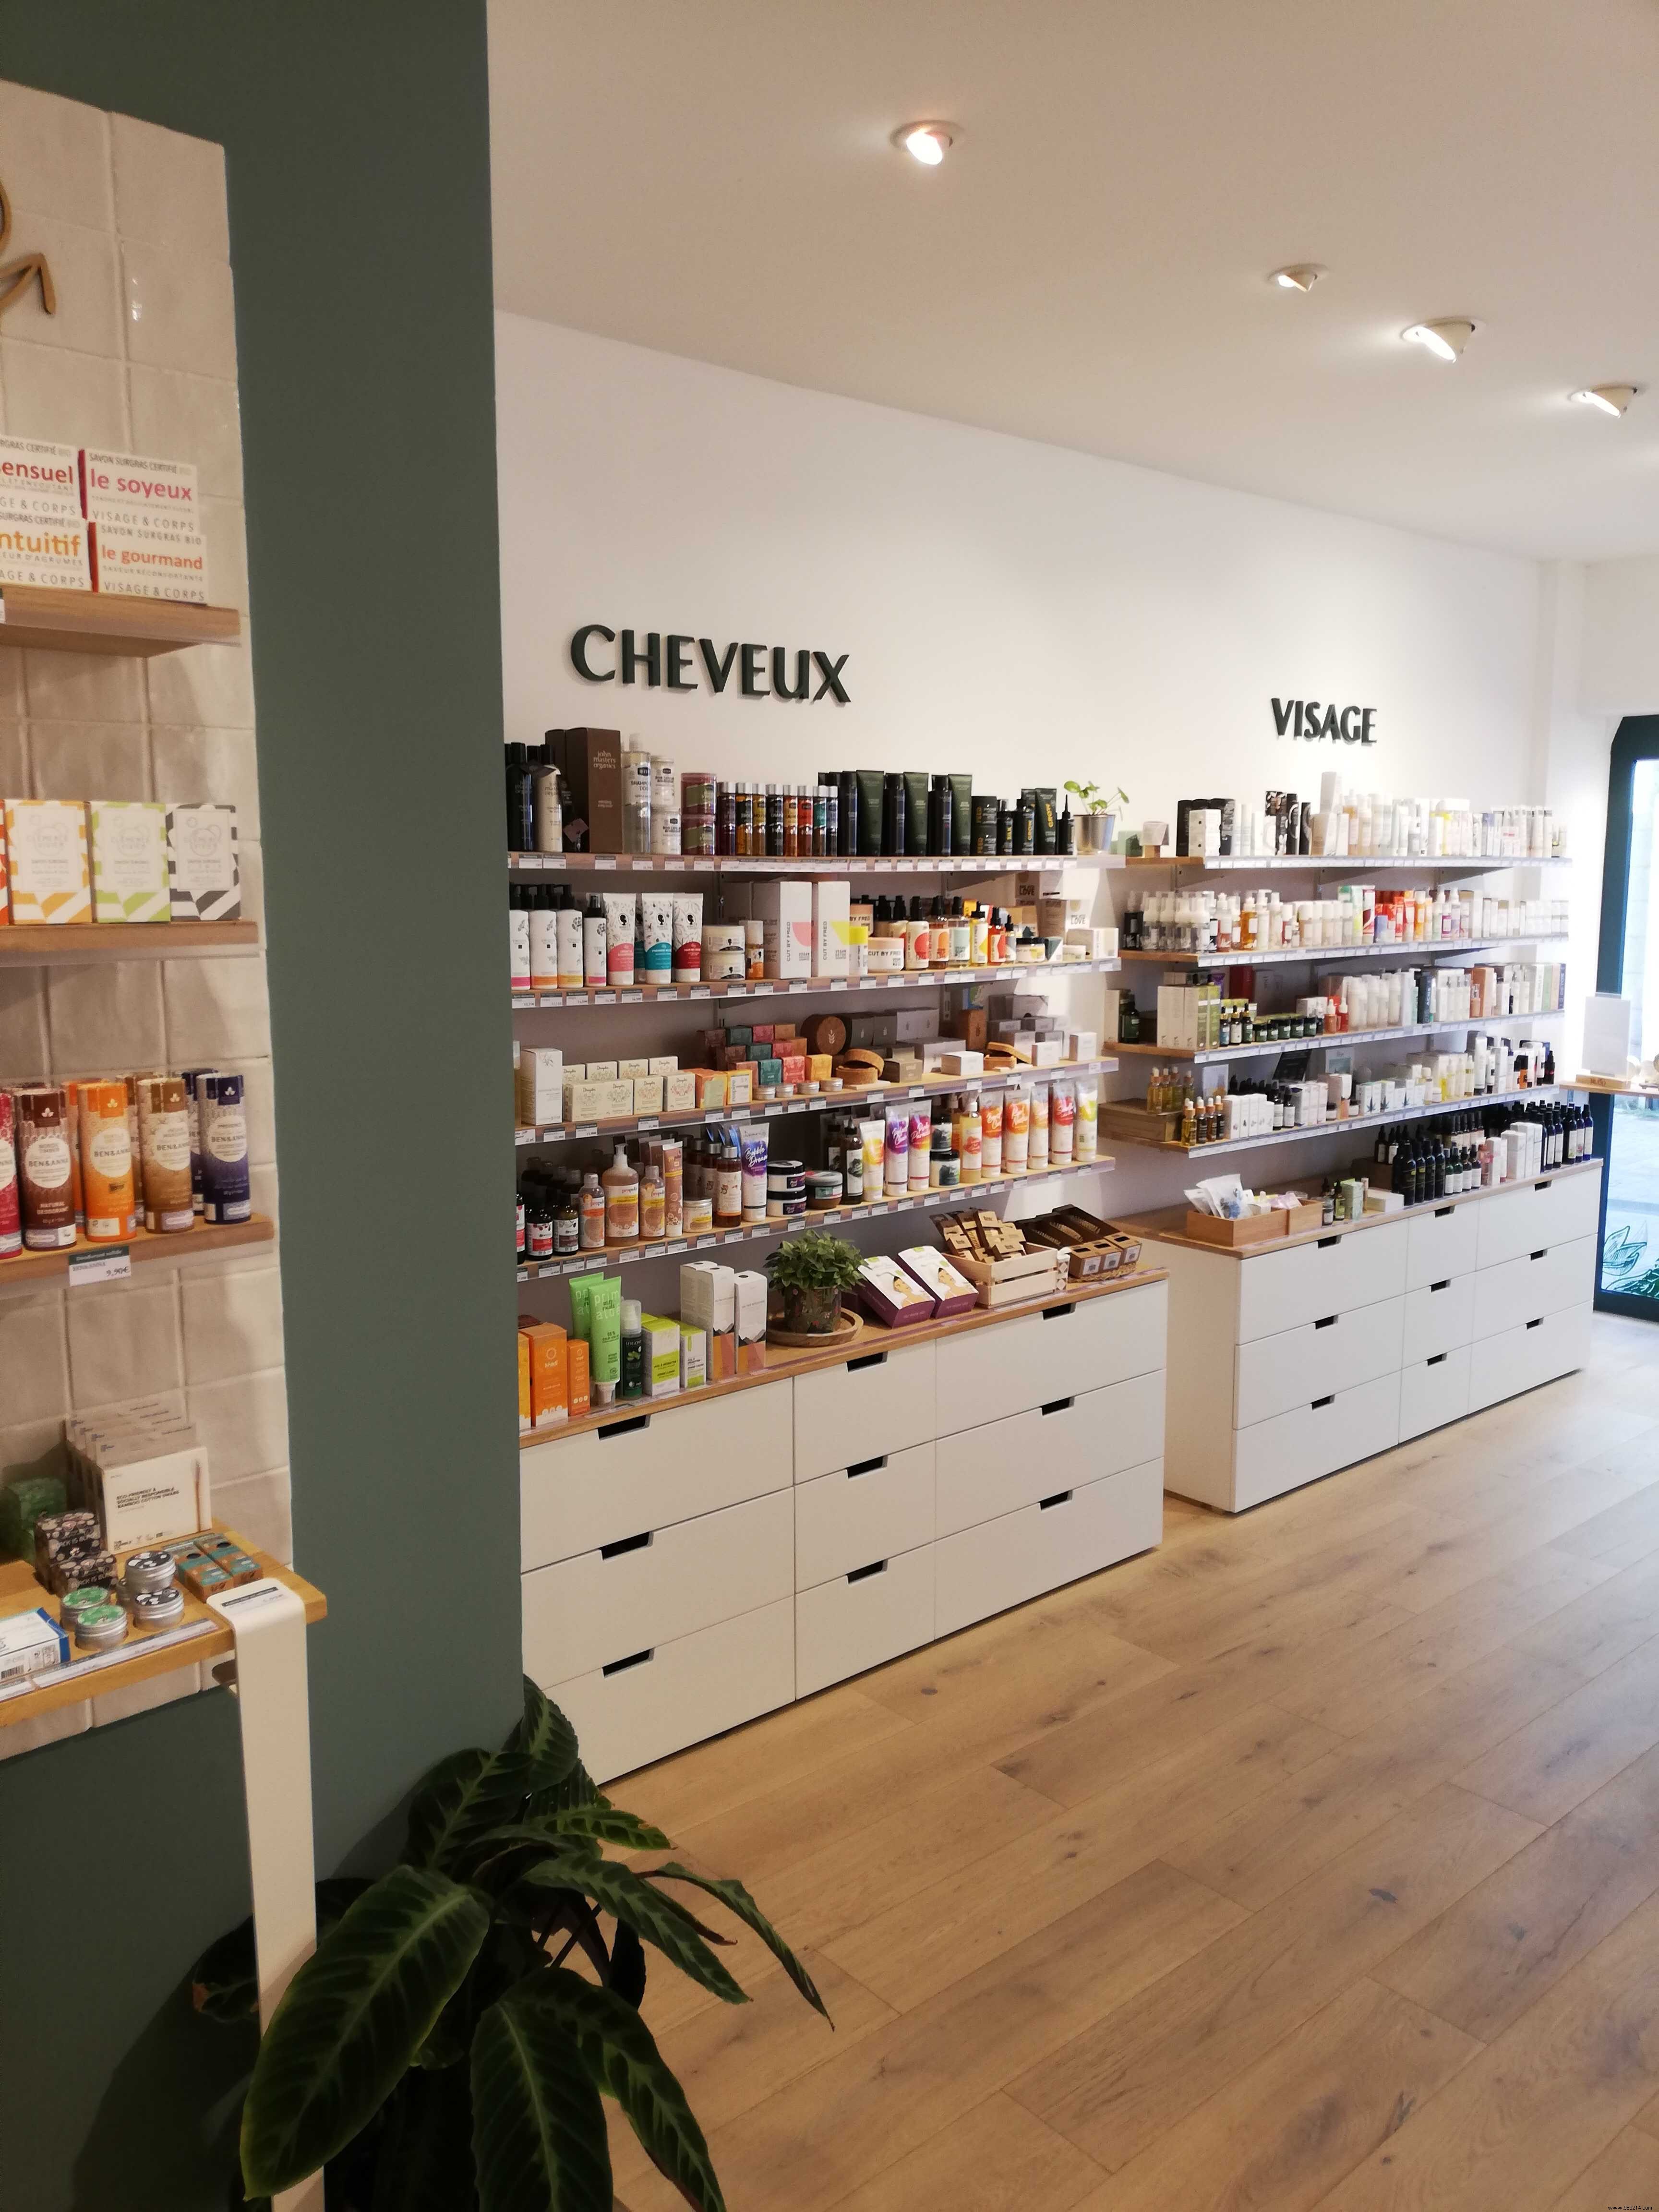 Nuoo sets up its new organic shop in Angers 